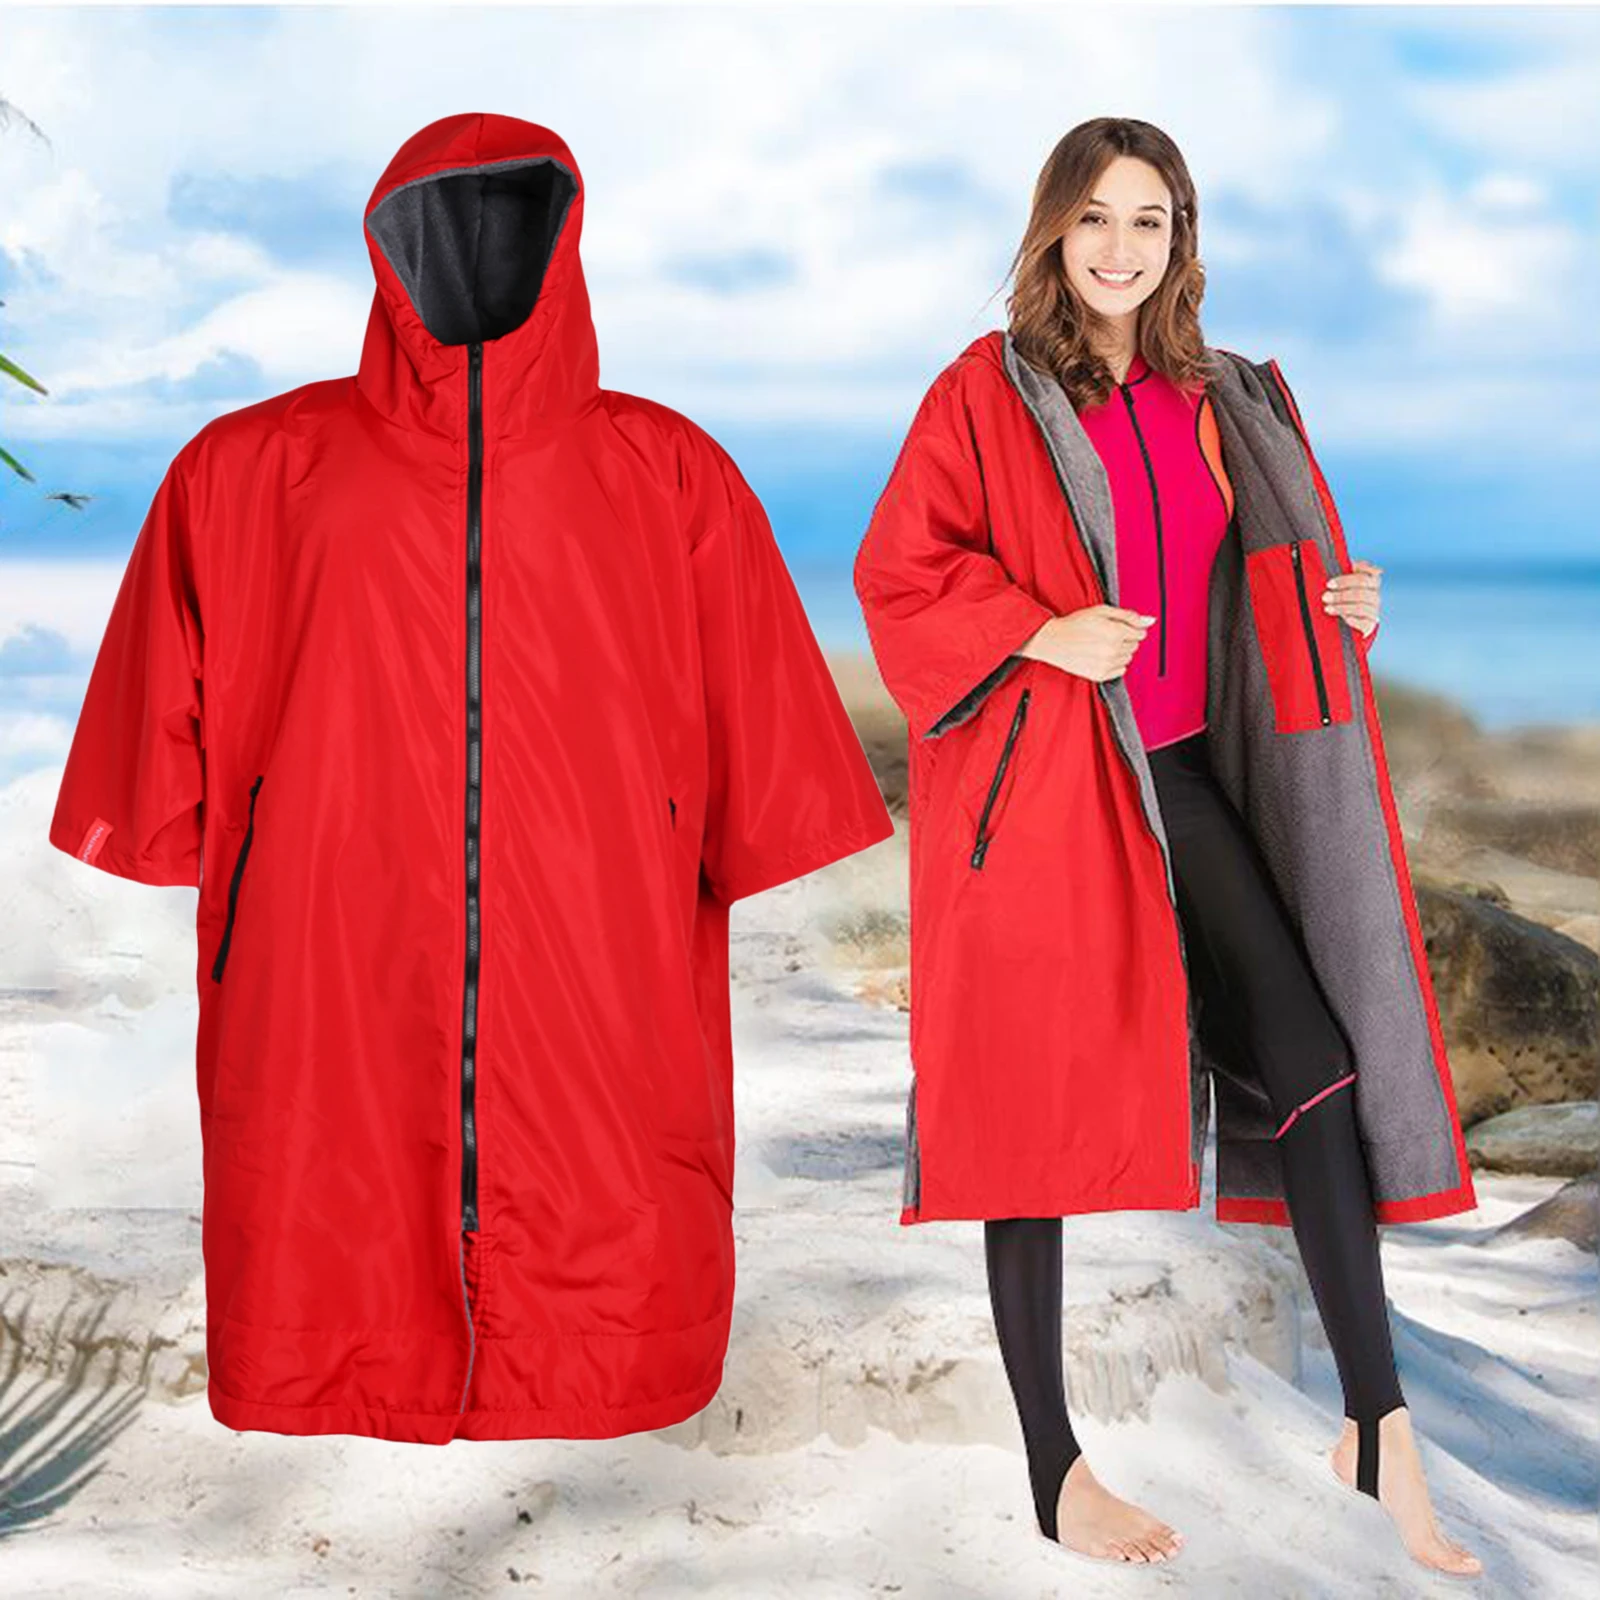 Waterproof Surf Changing Robe Outdoor Coat Fleece Lined Jacket Keeping Warm Dry Oversized Poncho for Swimming Surfing Beach | Спорт и